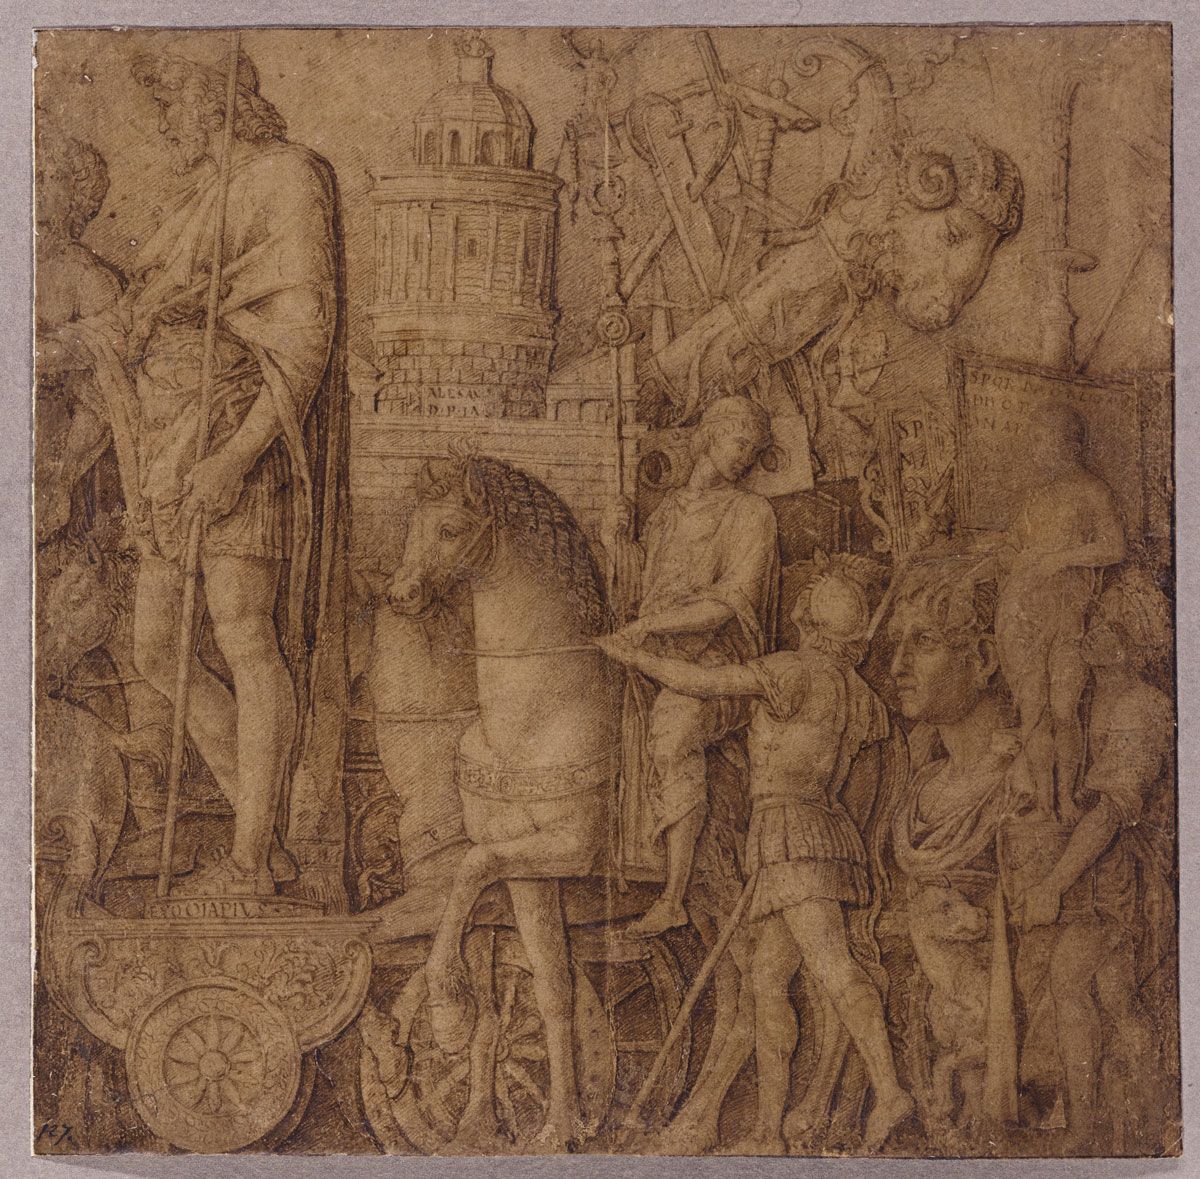 Mantegna's preparatory sketch for his painting Triumph of Caesar depicts The Standard Bearers and the Siege Equipment Image courtesy of Sotheby's